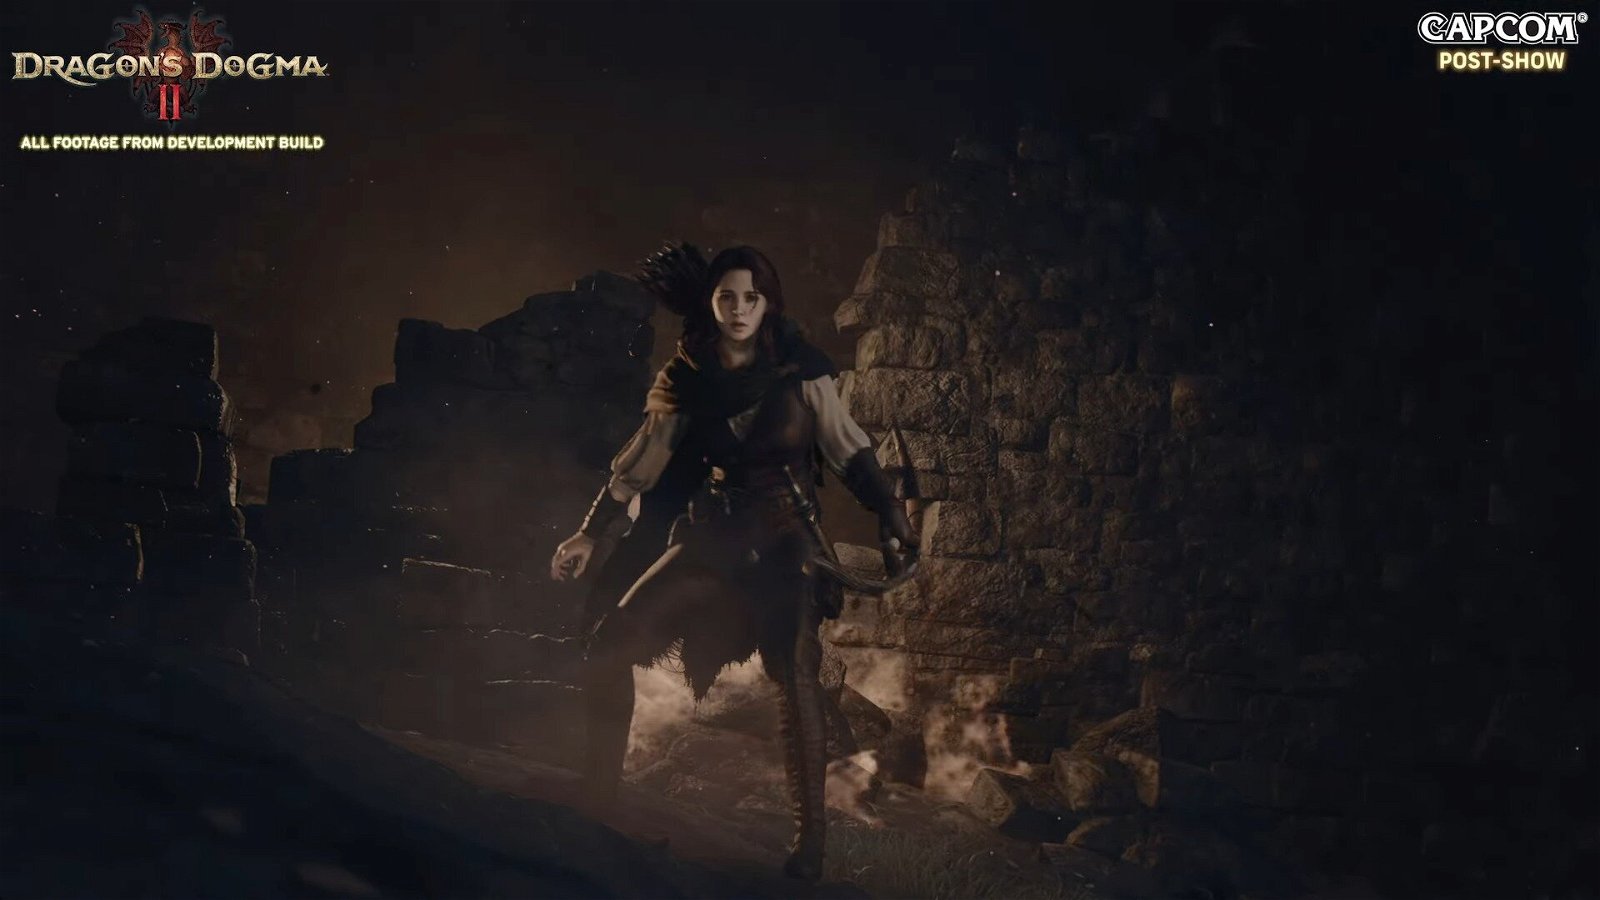 Dragon's Dogma 2 Release Date and New Game Details Revealed